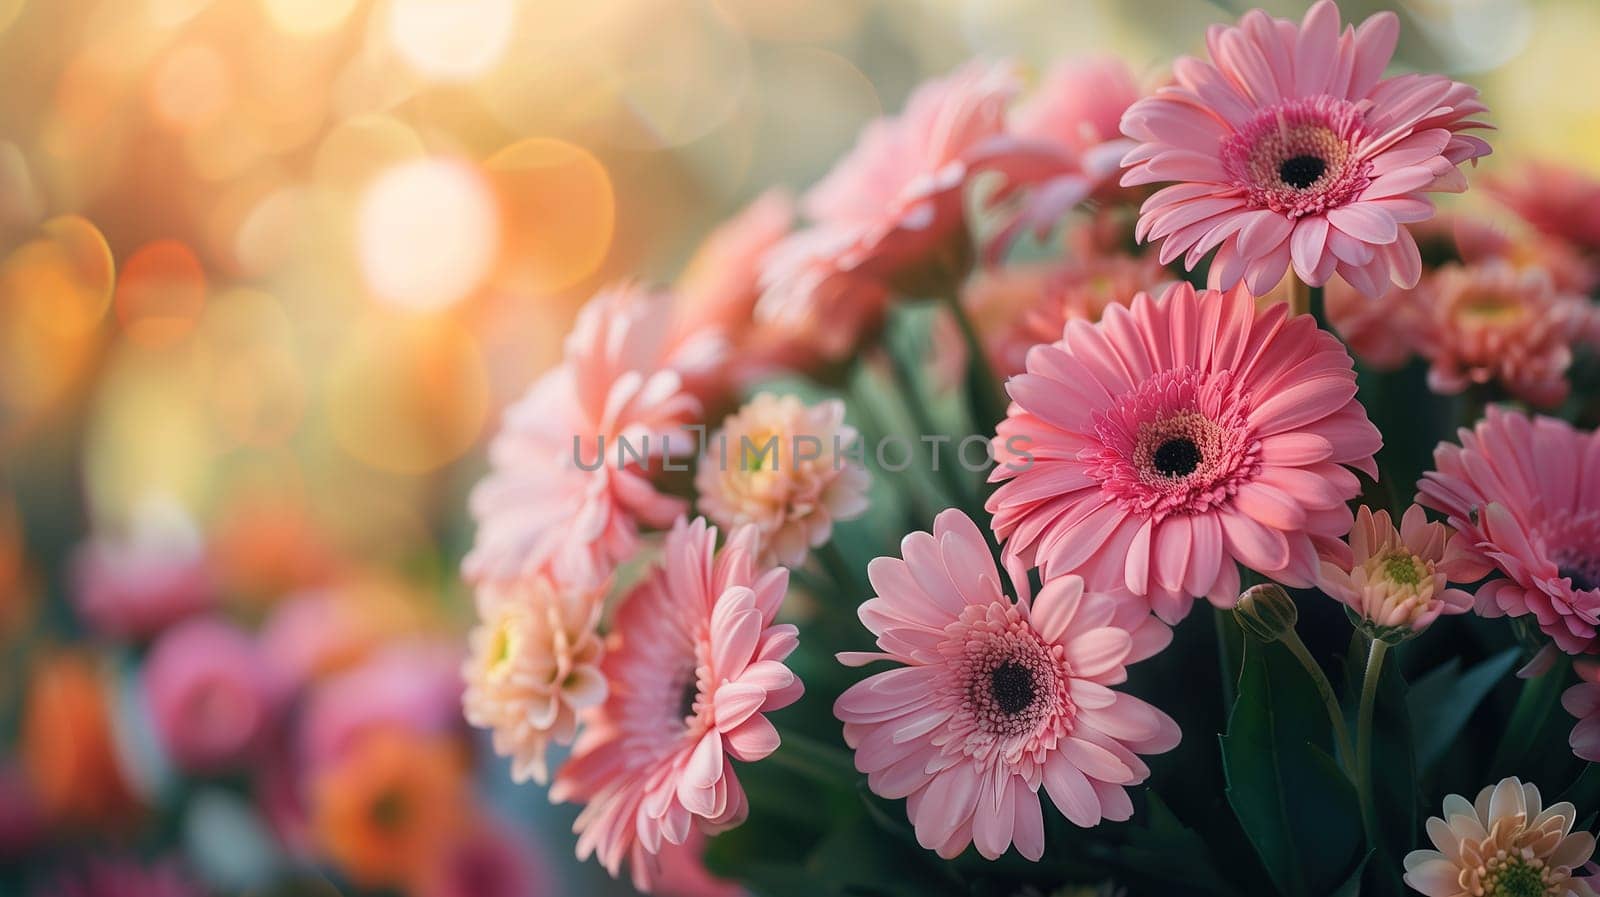 Pretty Pink Flowers in a Vase by TRMK